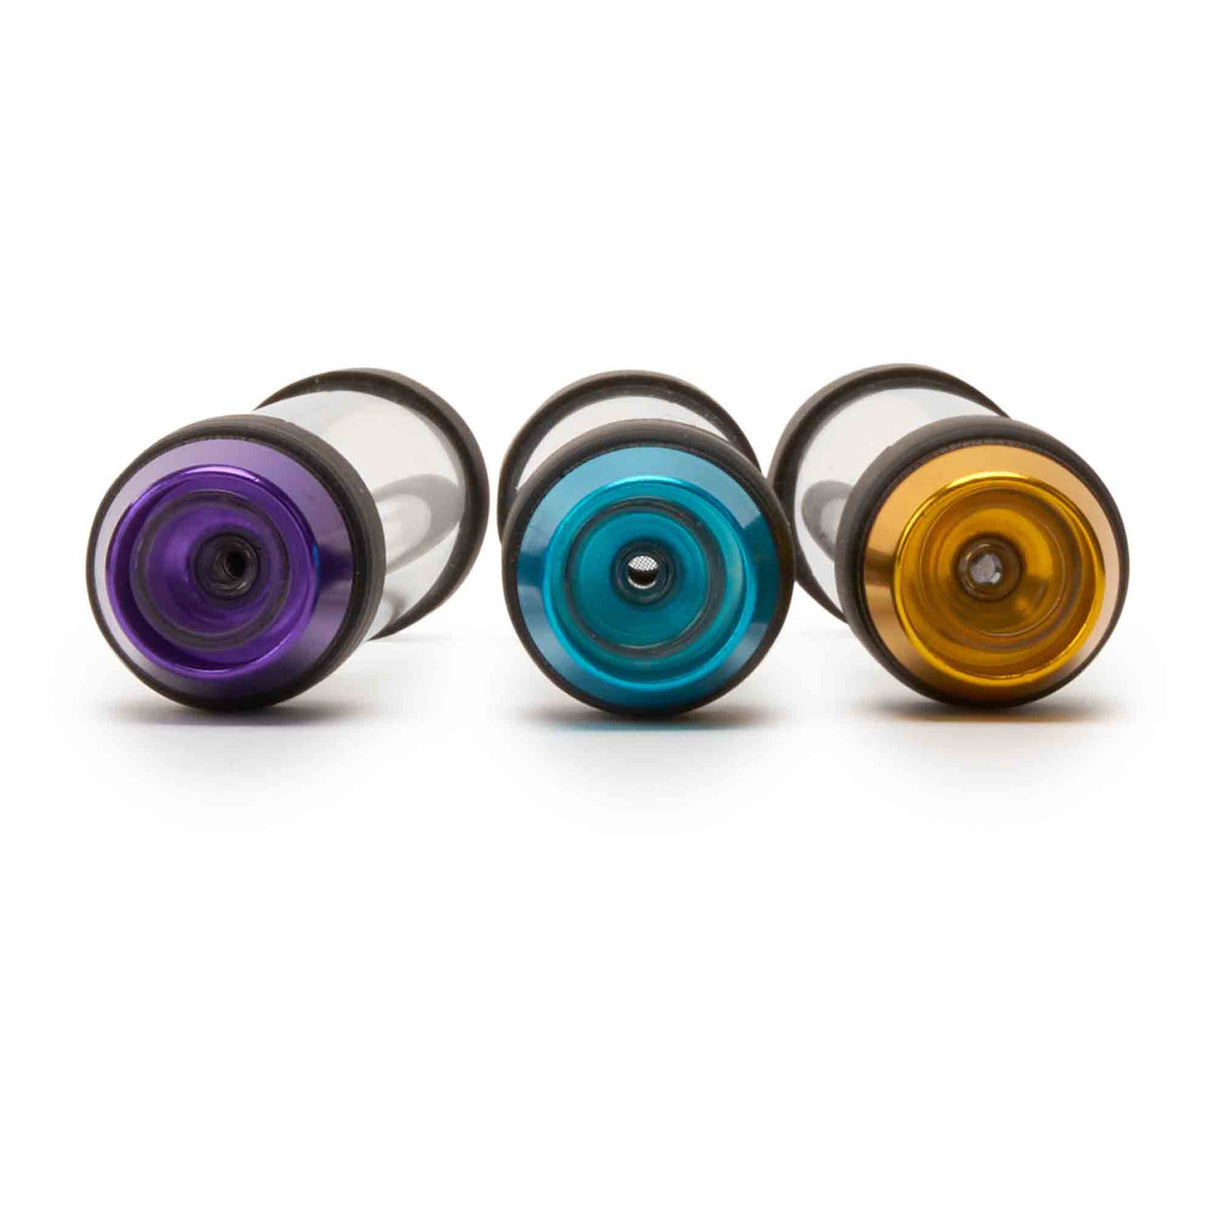 Incredibowl Steamroll style pipe assorted colors